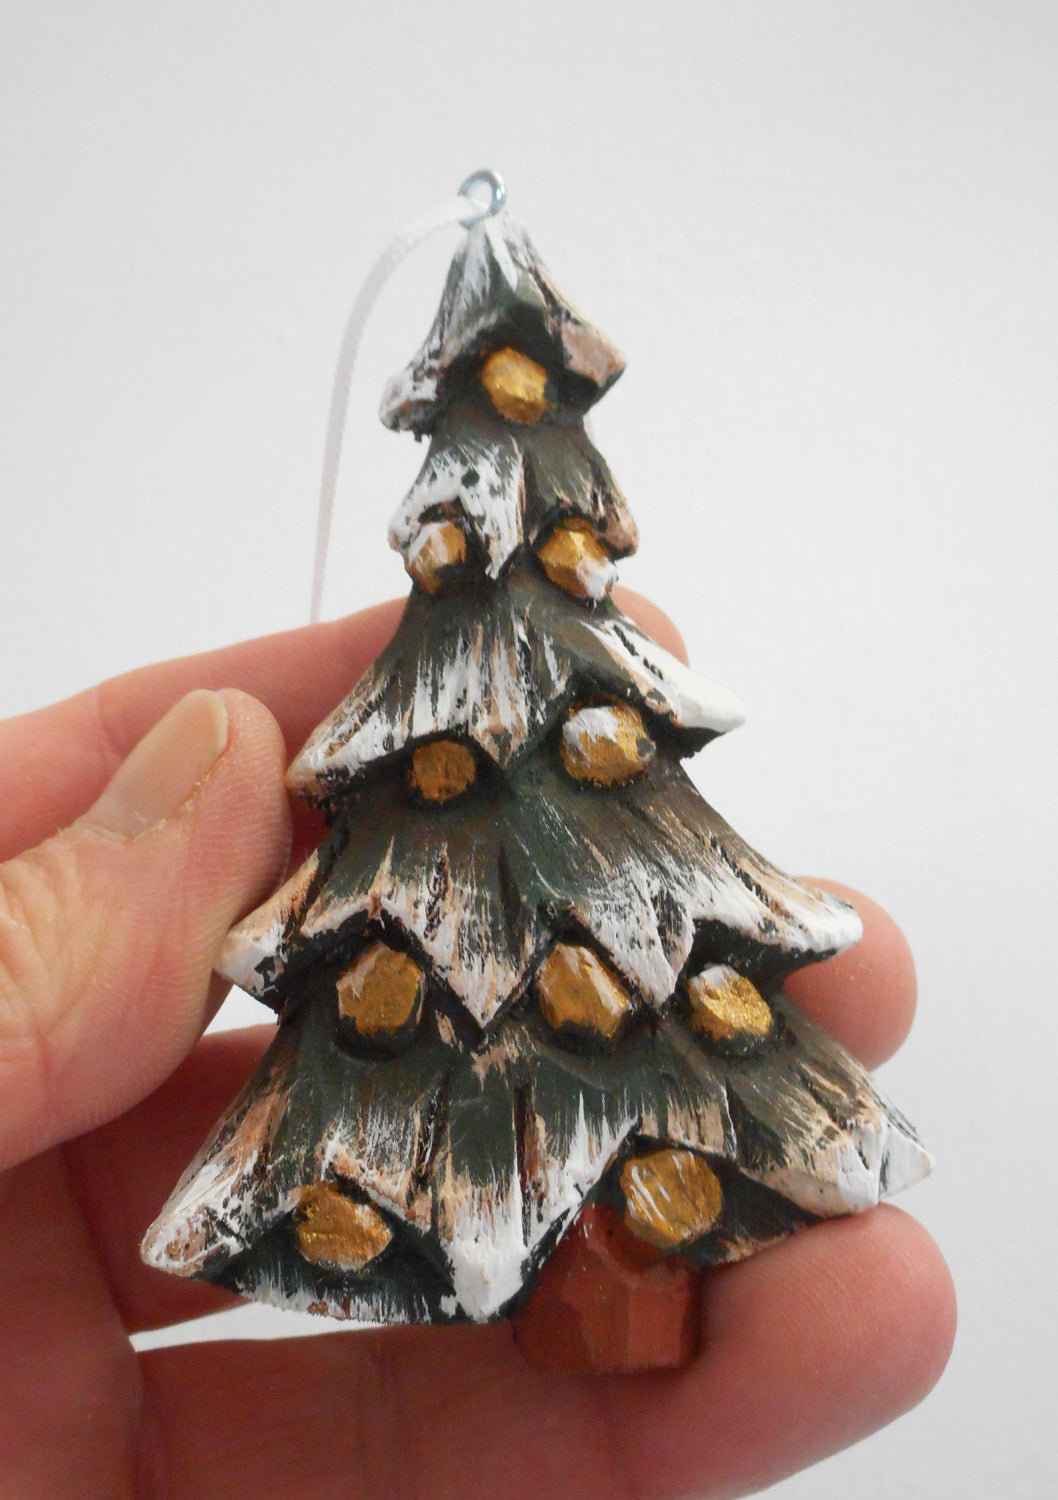 Wooden Christmas Tree Ornament